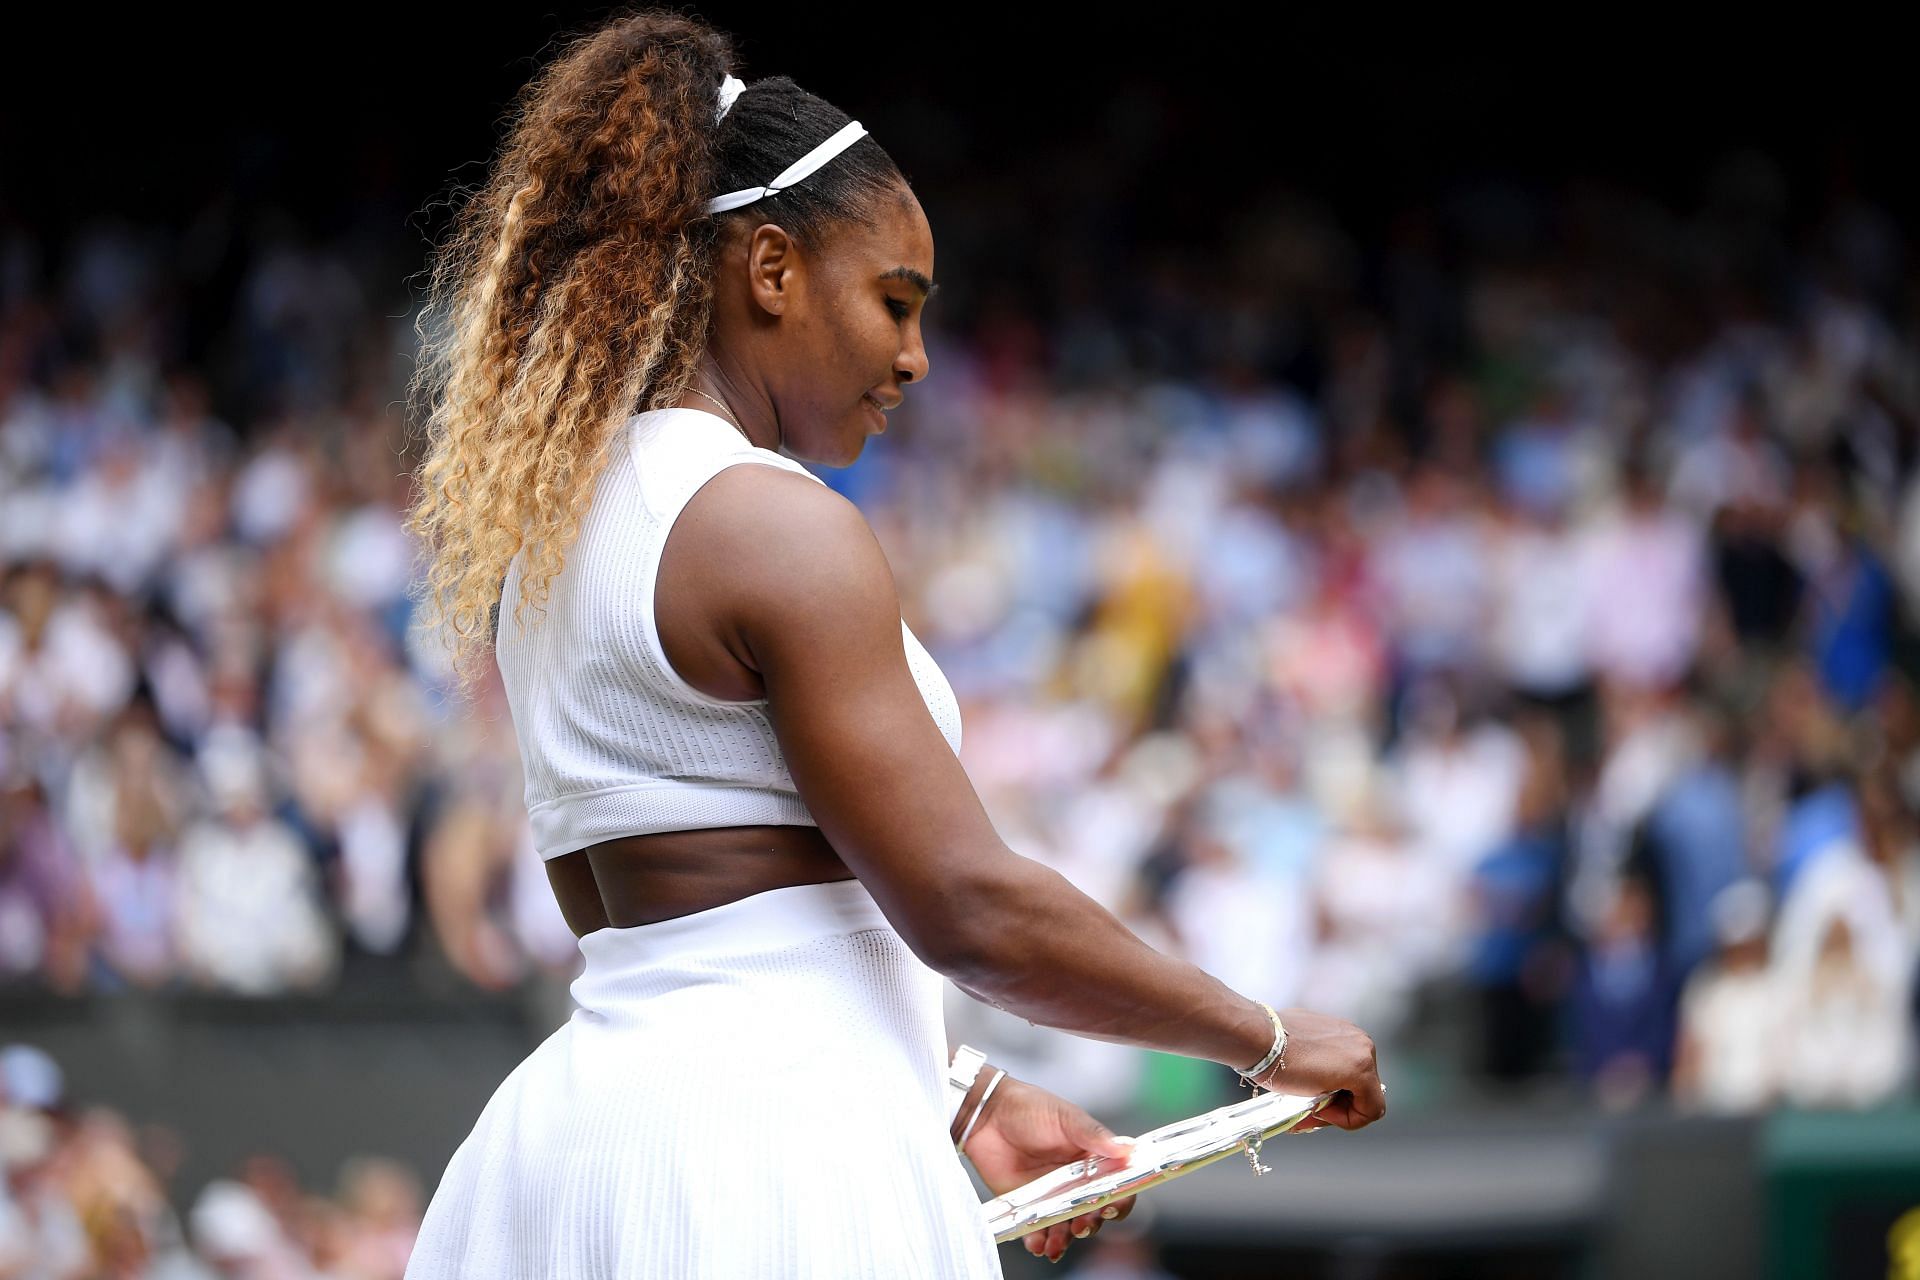 Serena Williams with the runner-up trophy at Wimbledon 2019